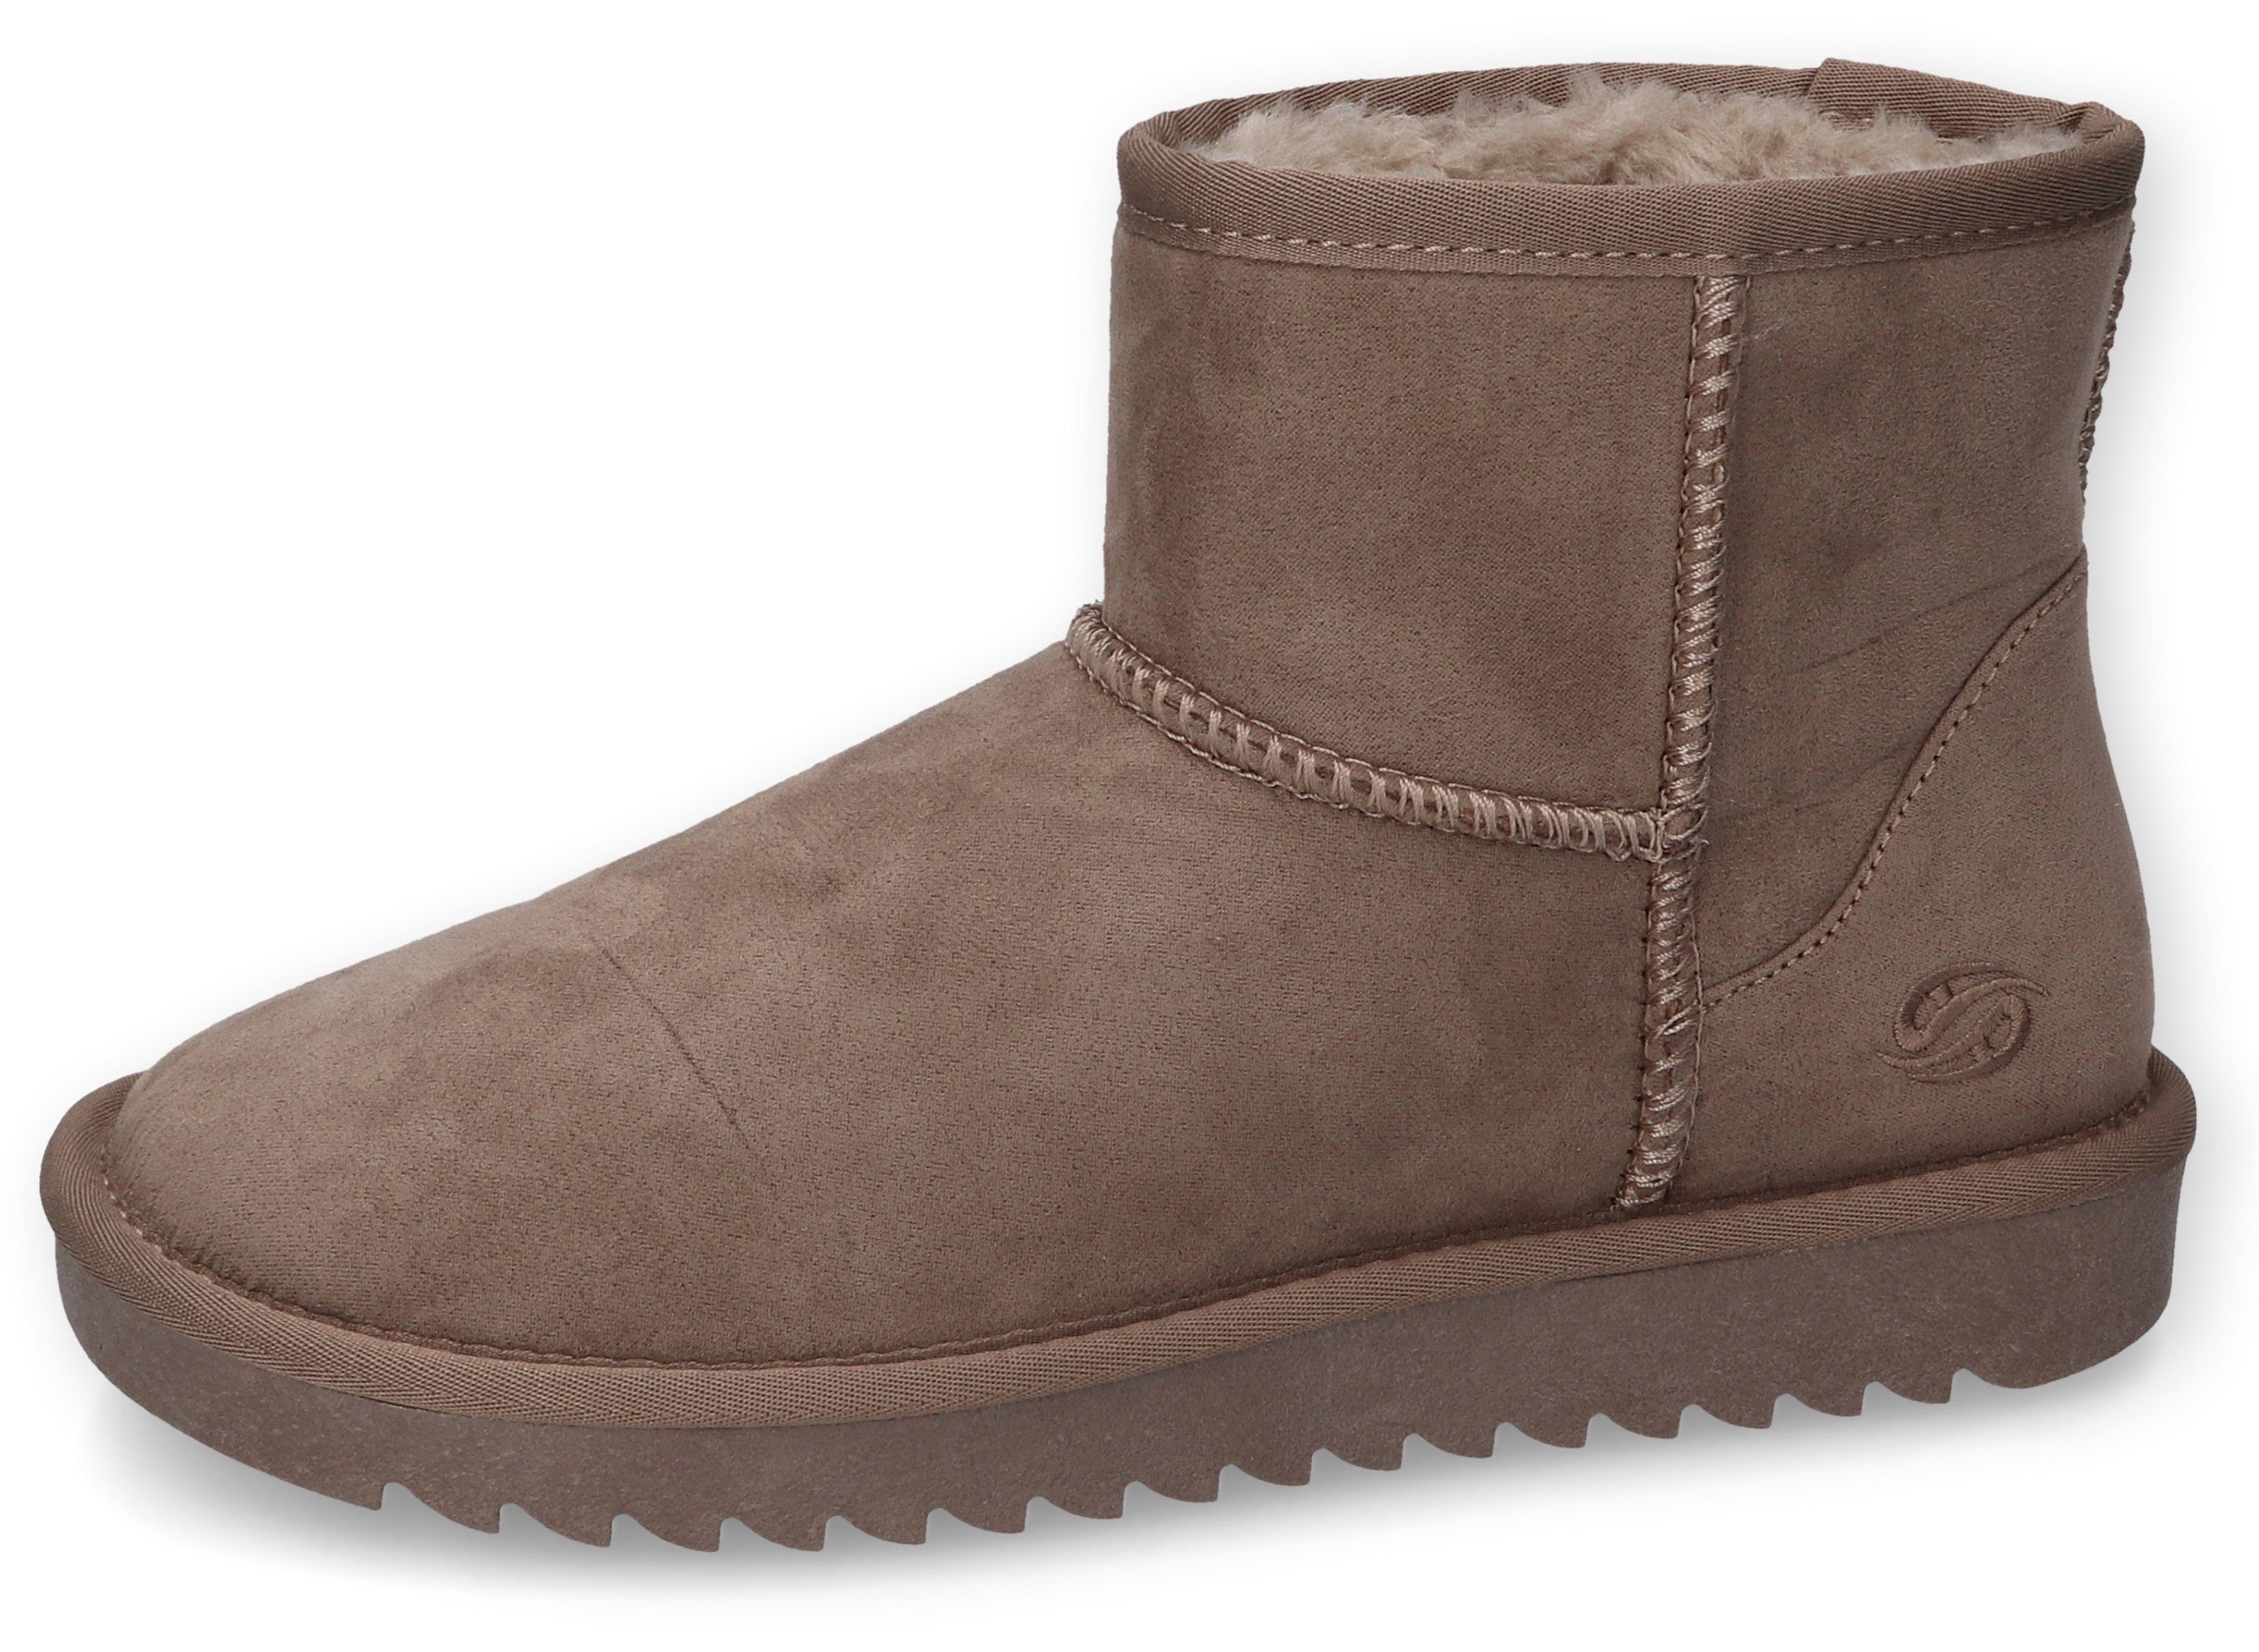 Dockers by Gerli Winterboots mit Warmfutter taupe